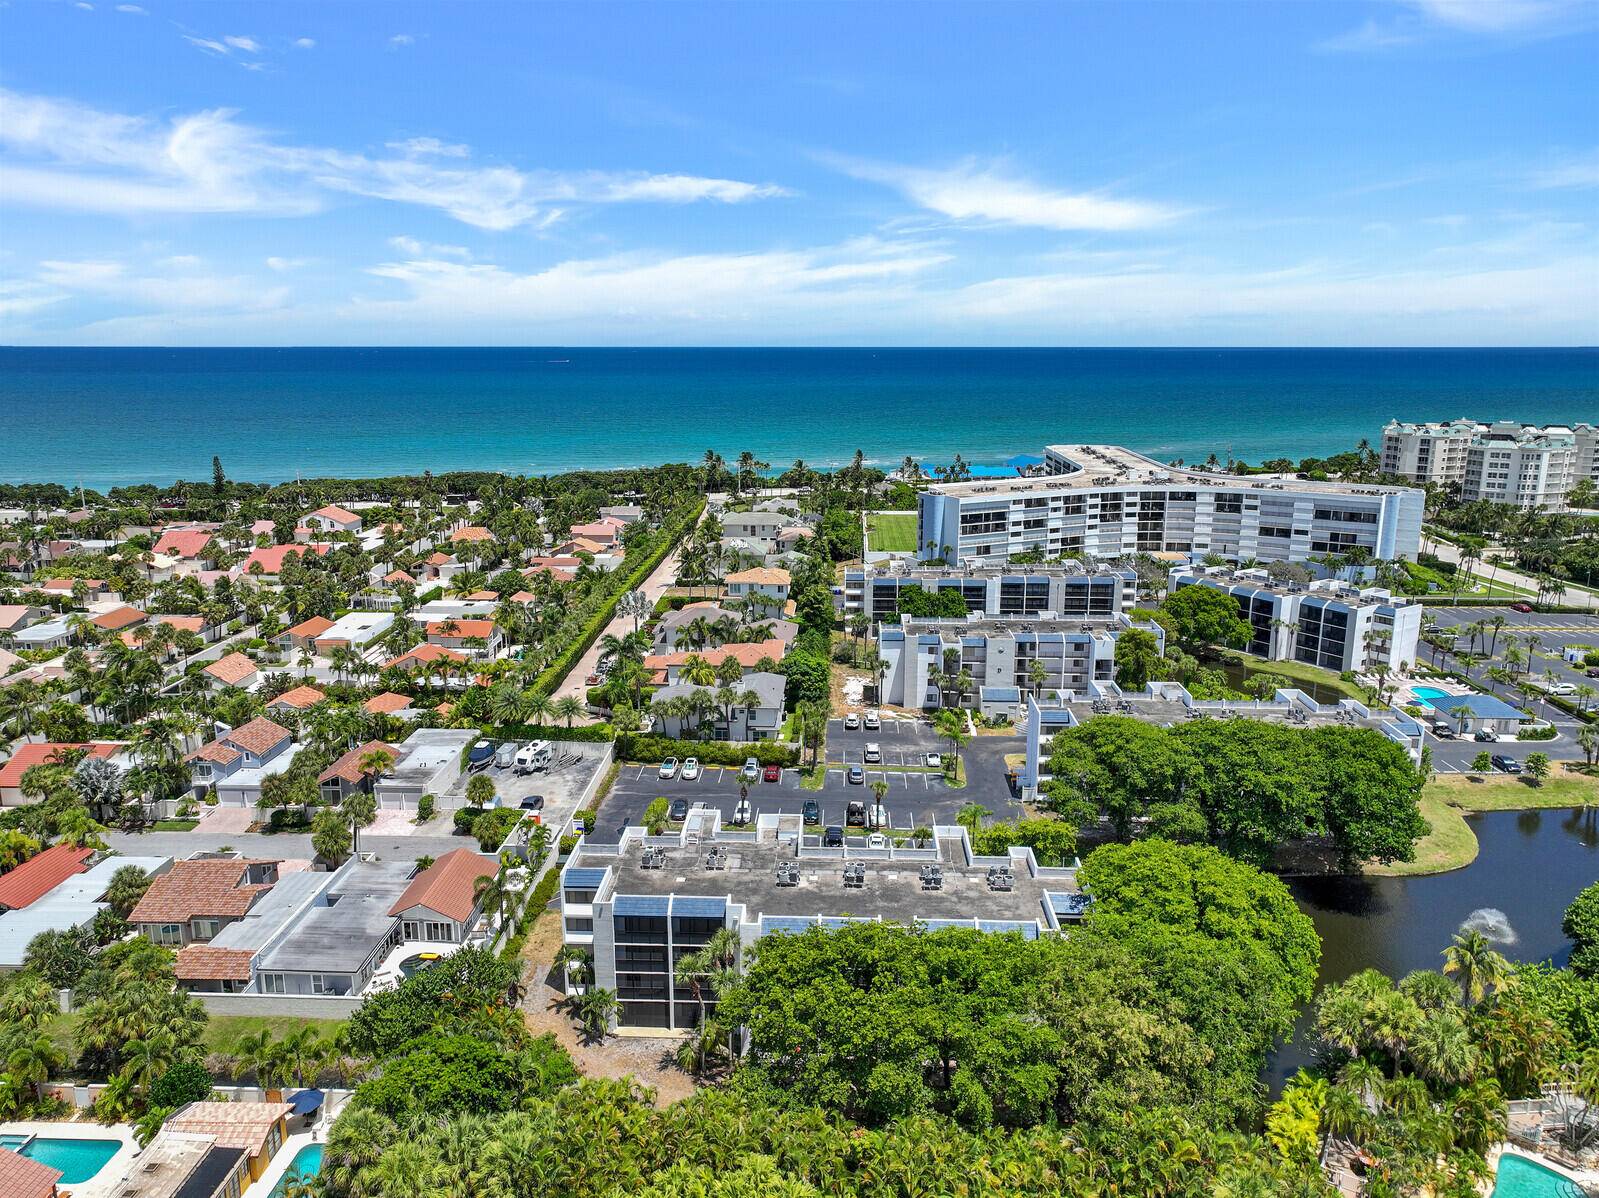 Walk to the beach from your renovated top floor corner unit at Searise.